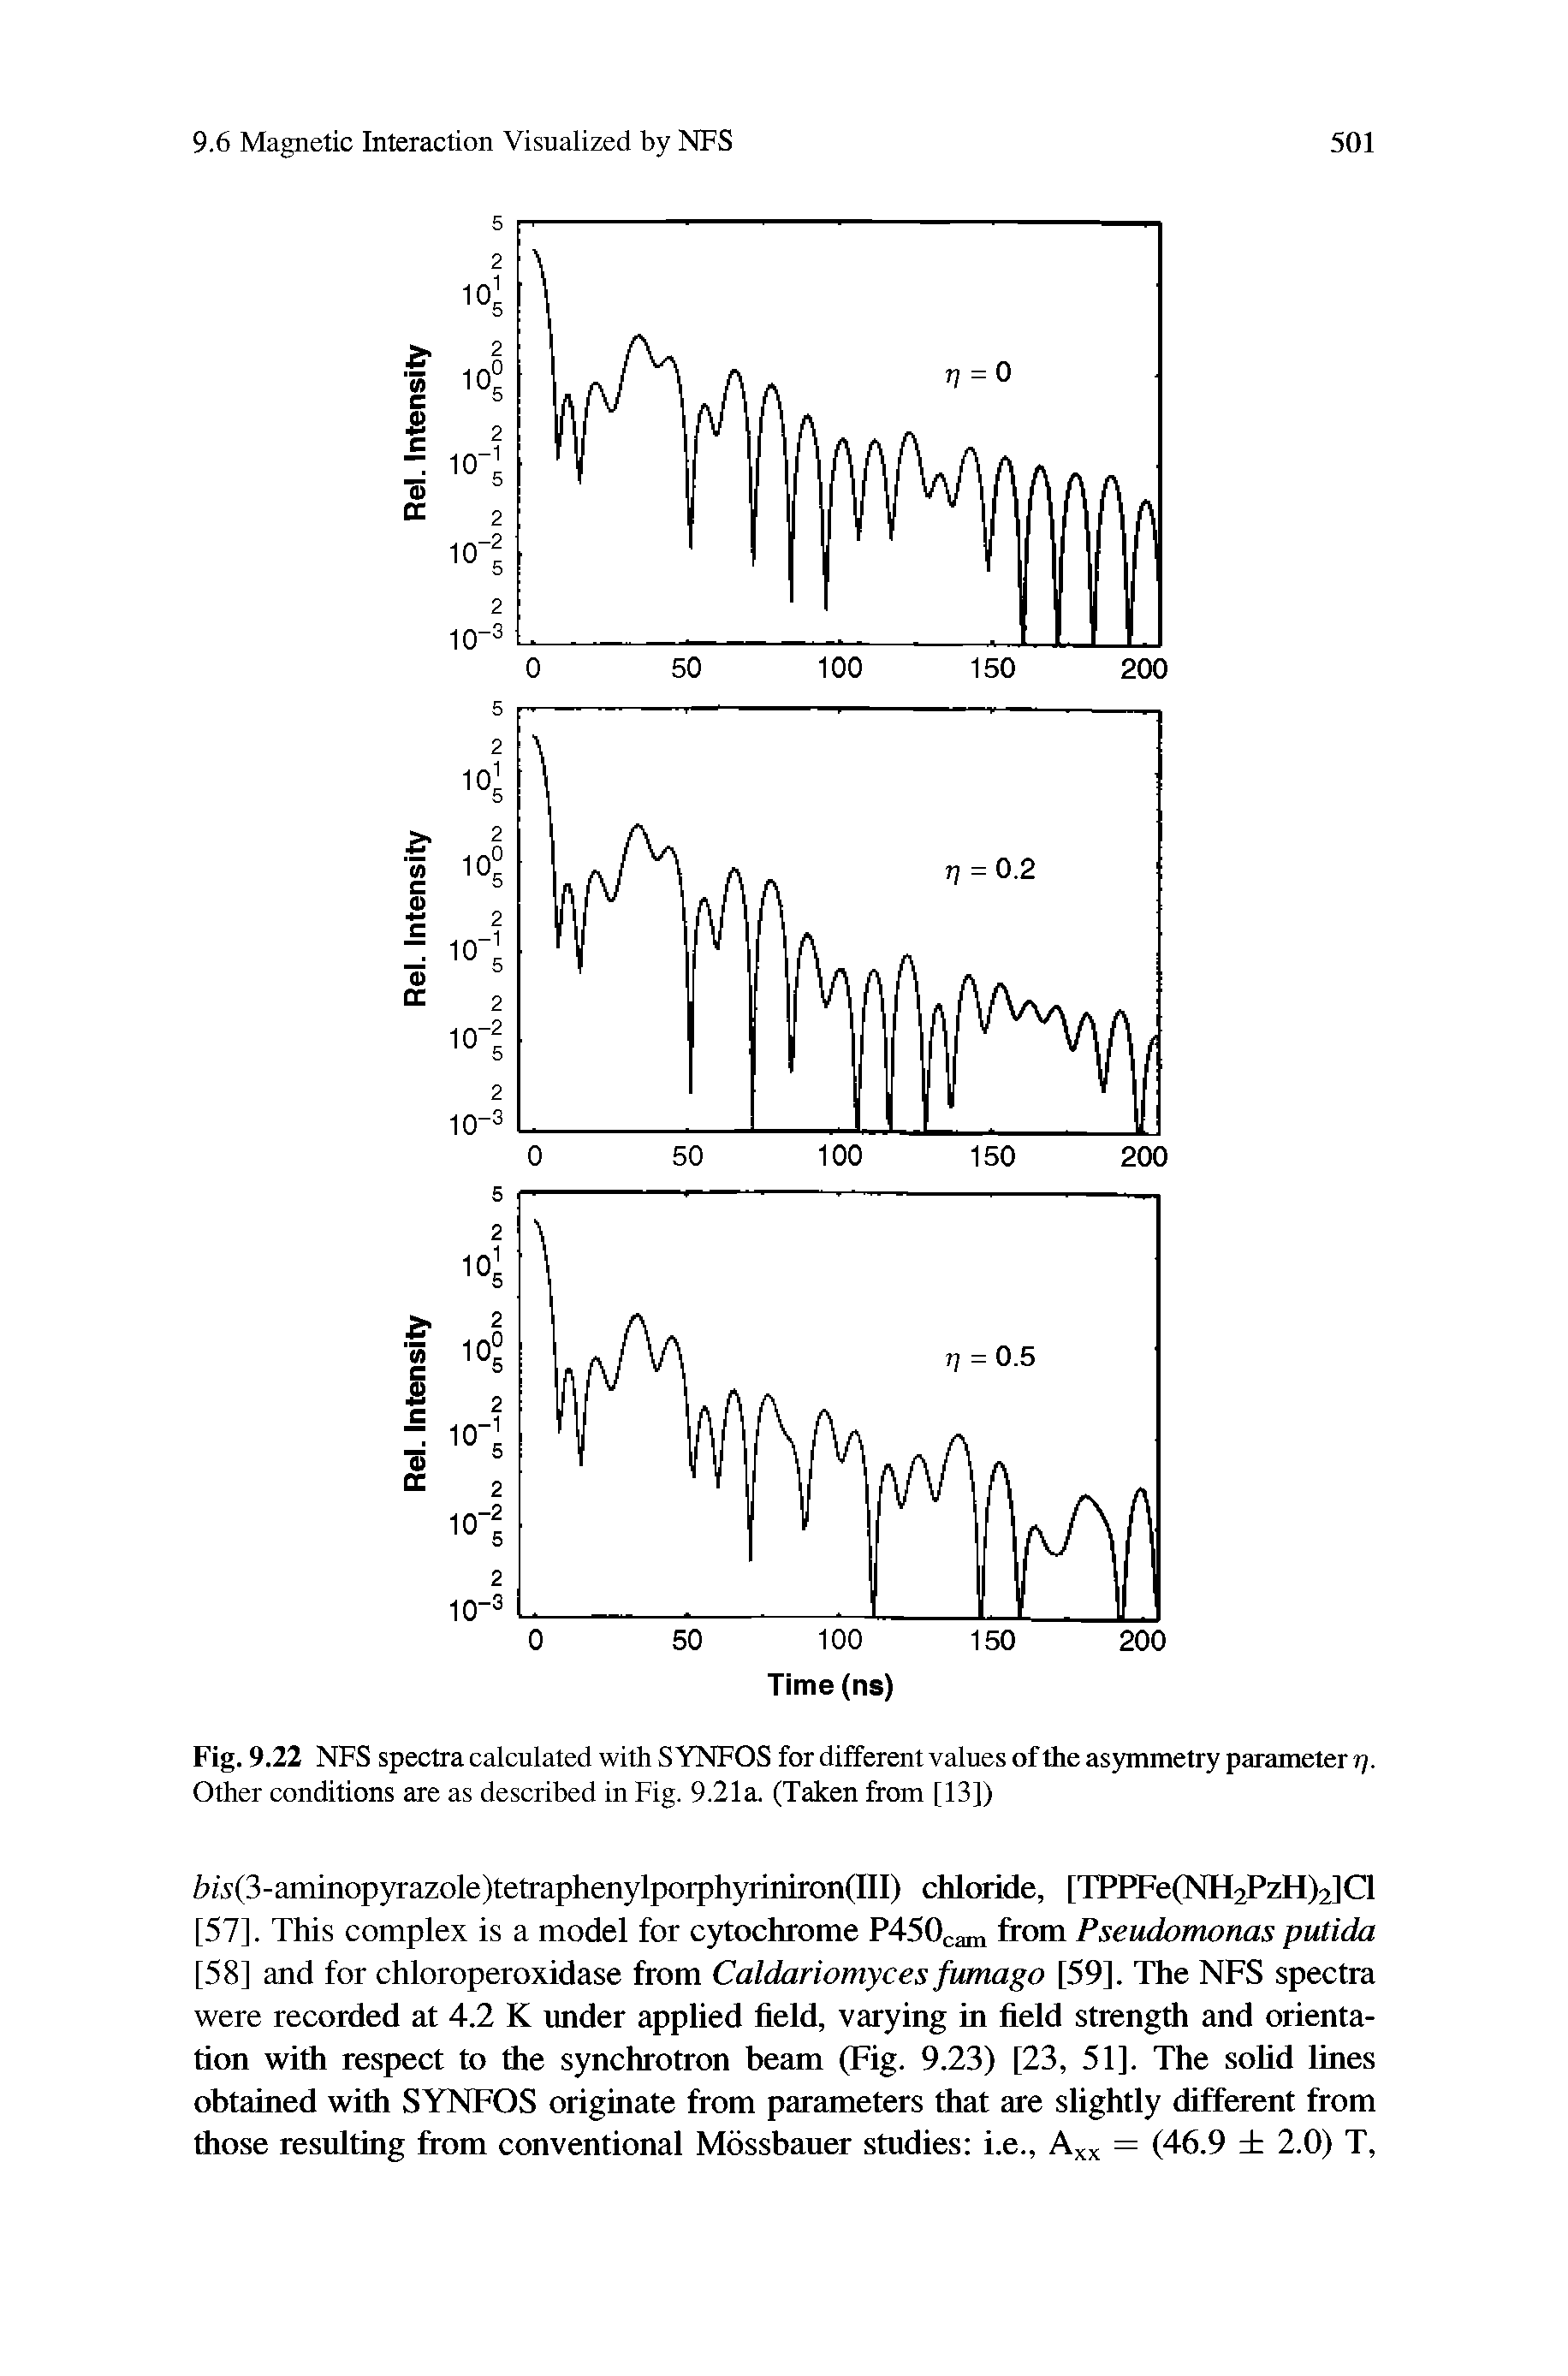 Fig. 9.22 NFS spectra calculated with S YNFOS for different values of the asymmetry parameter j . Other conditions are as described in Fig. 9.21a. (Taken from [13])...